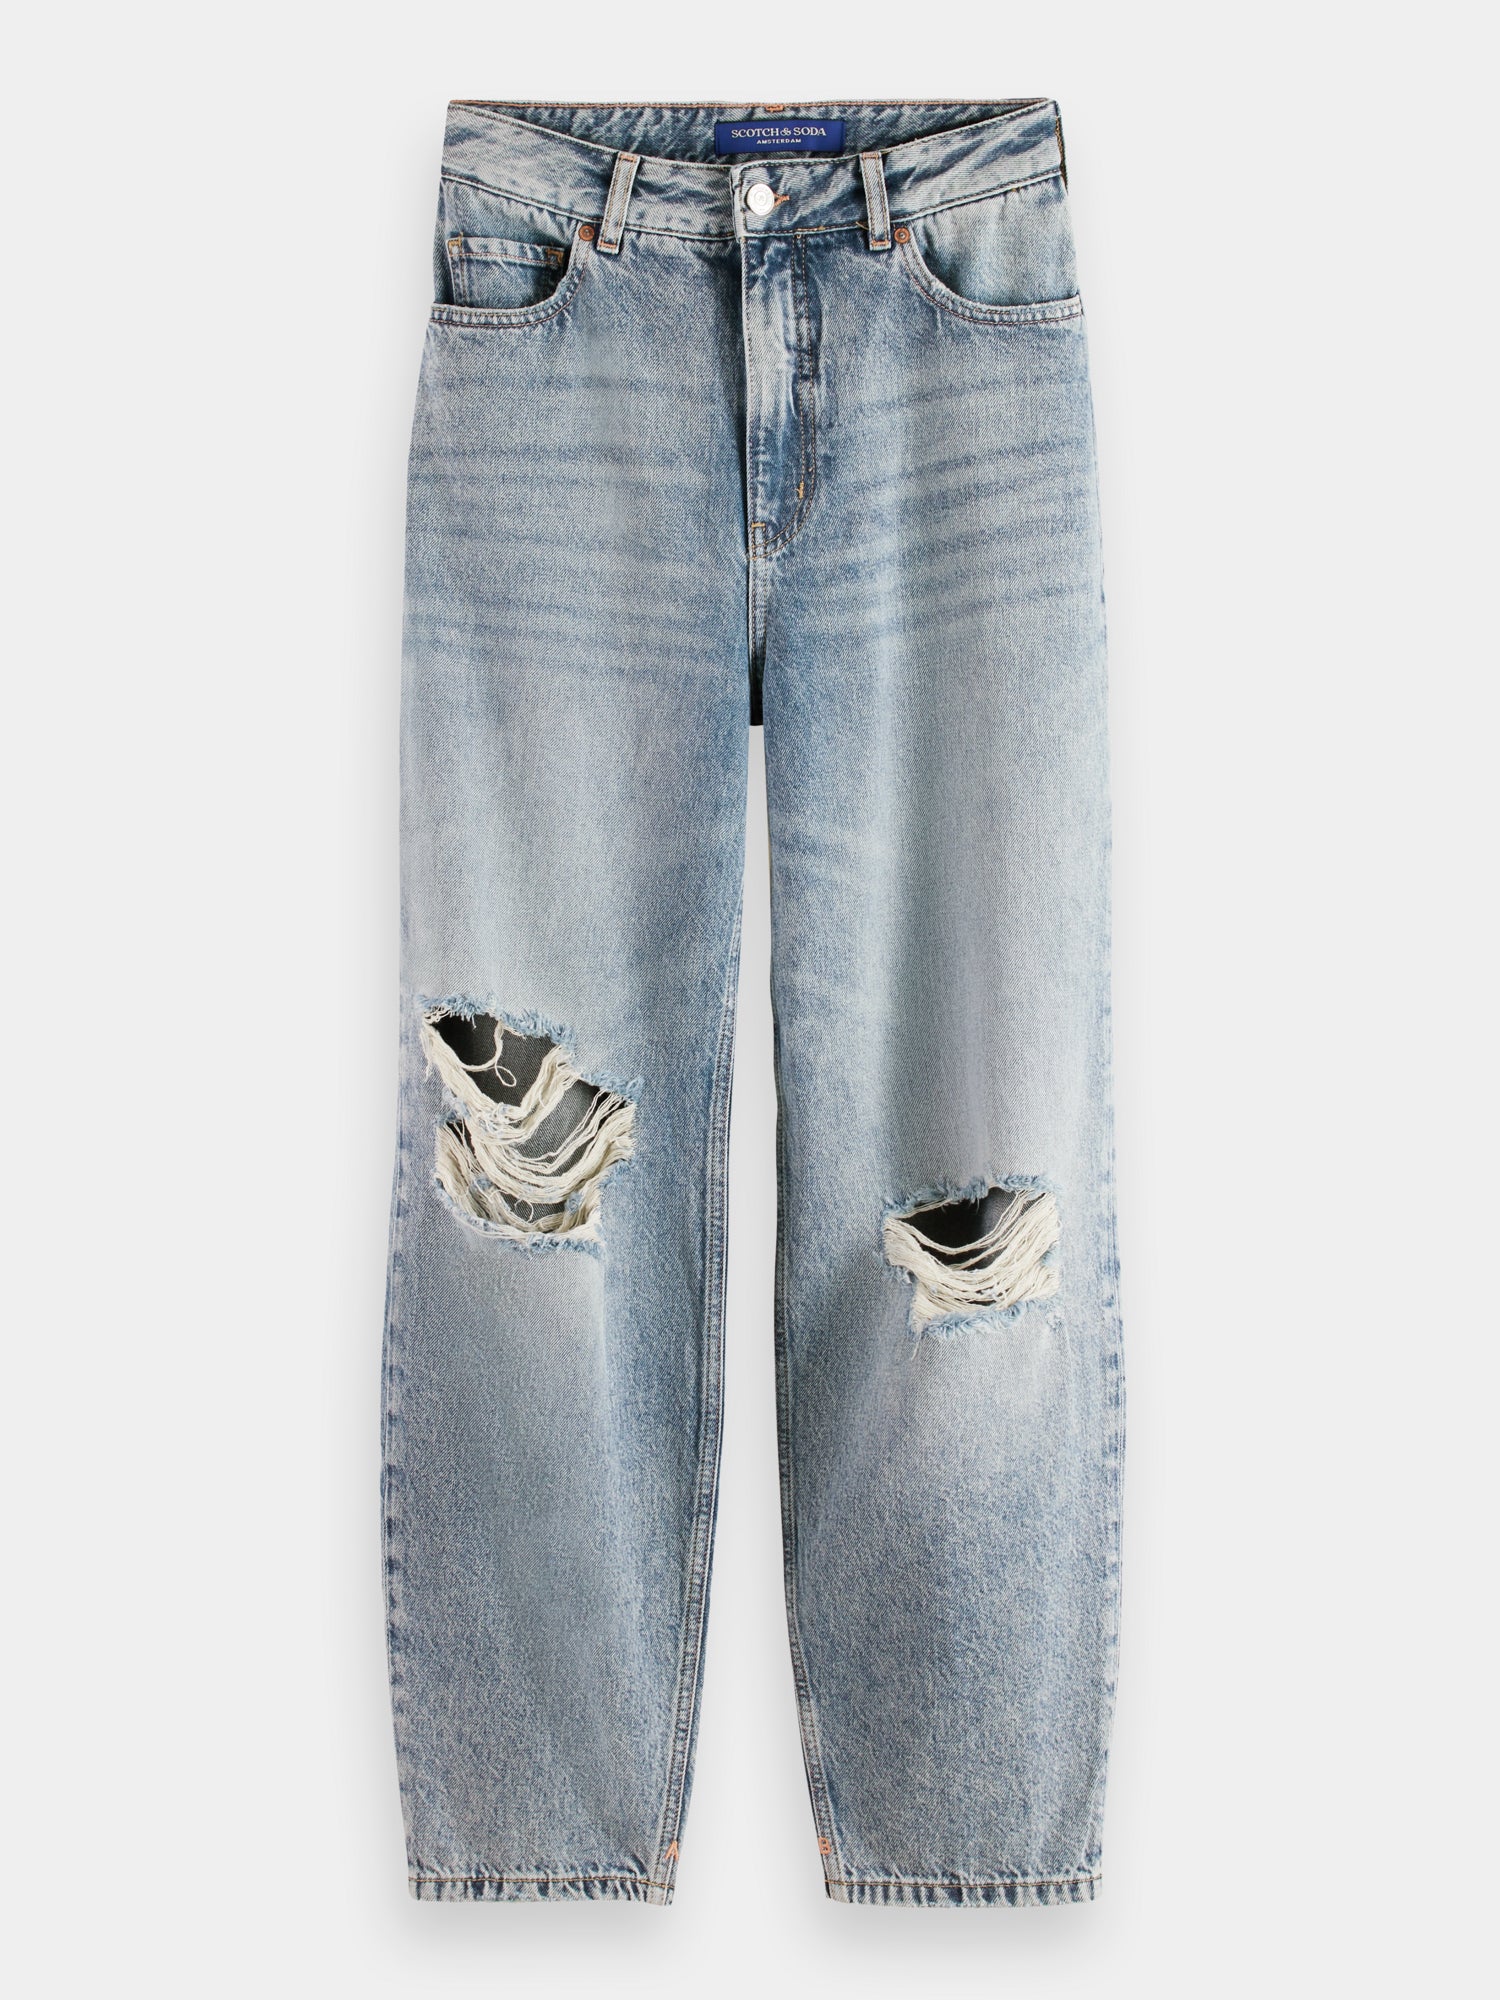 Tide balloon jeans - Back To Nature 32"